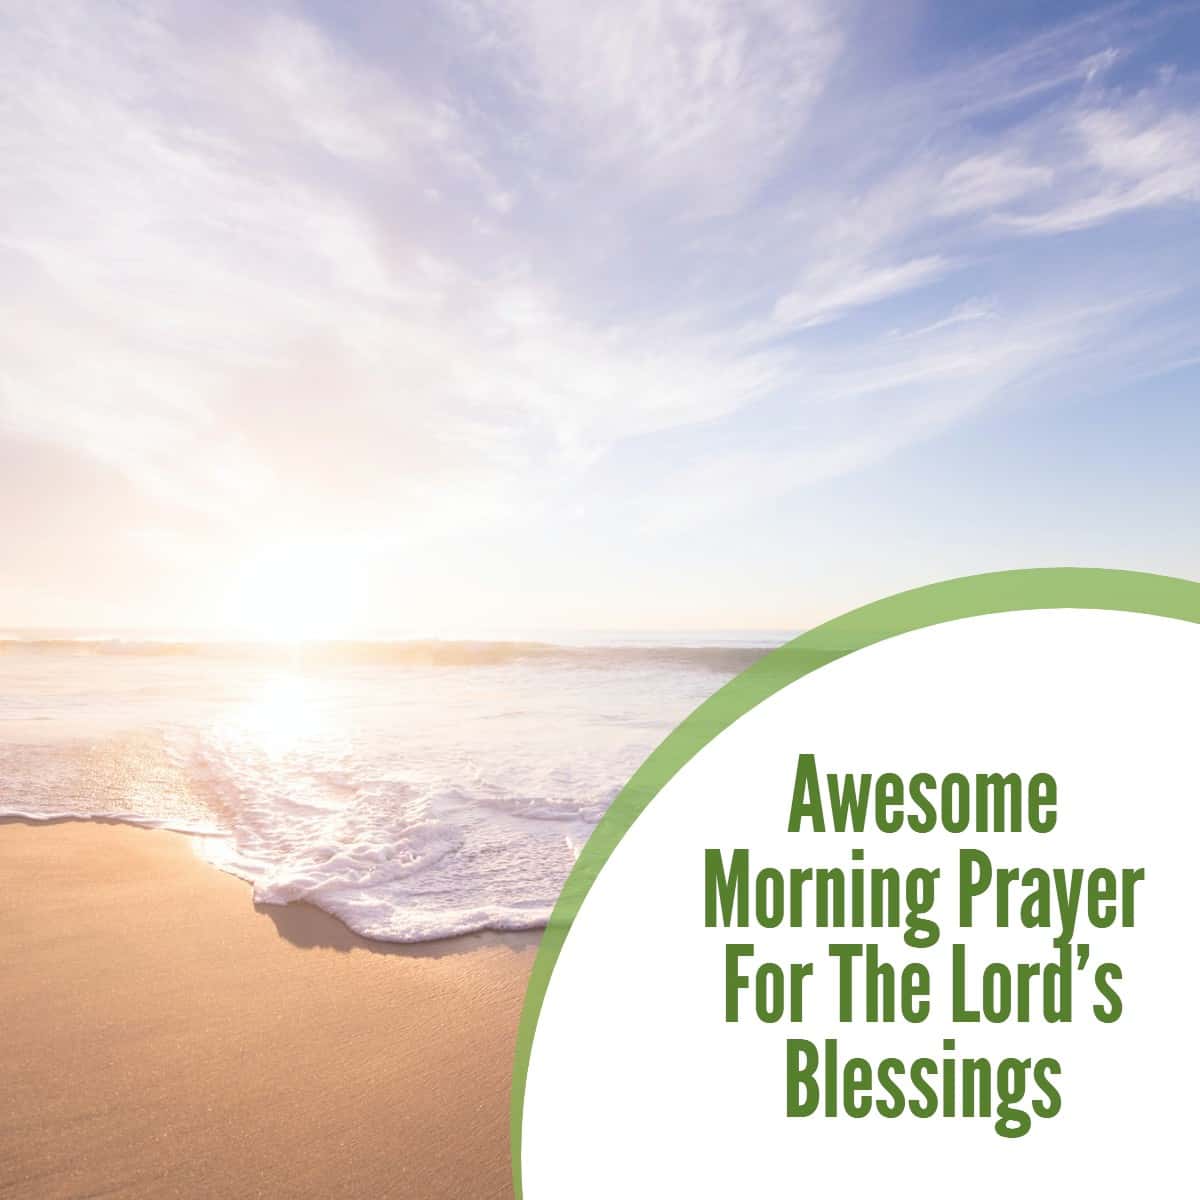 Awesome Morning Prayer For The Lord’s Blessings